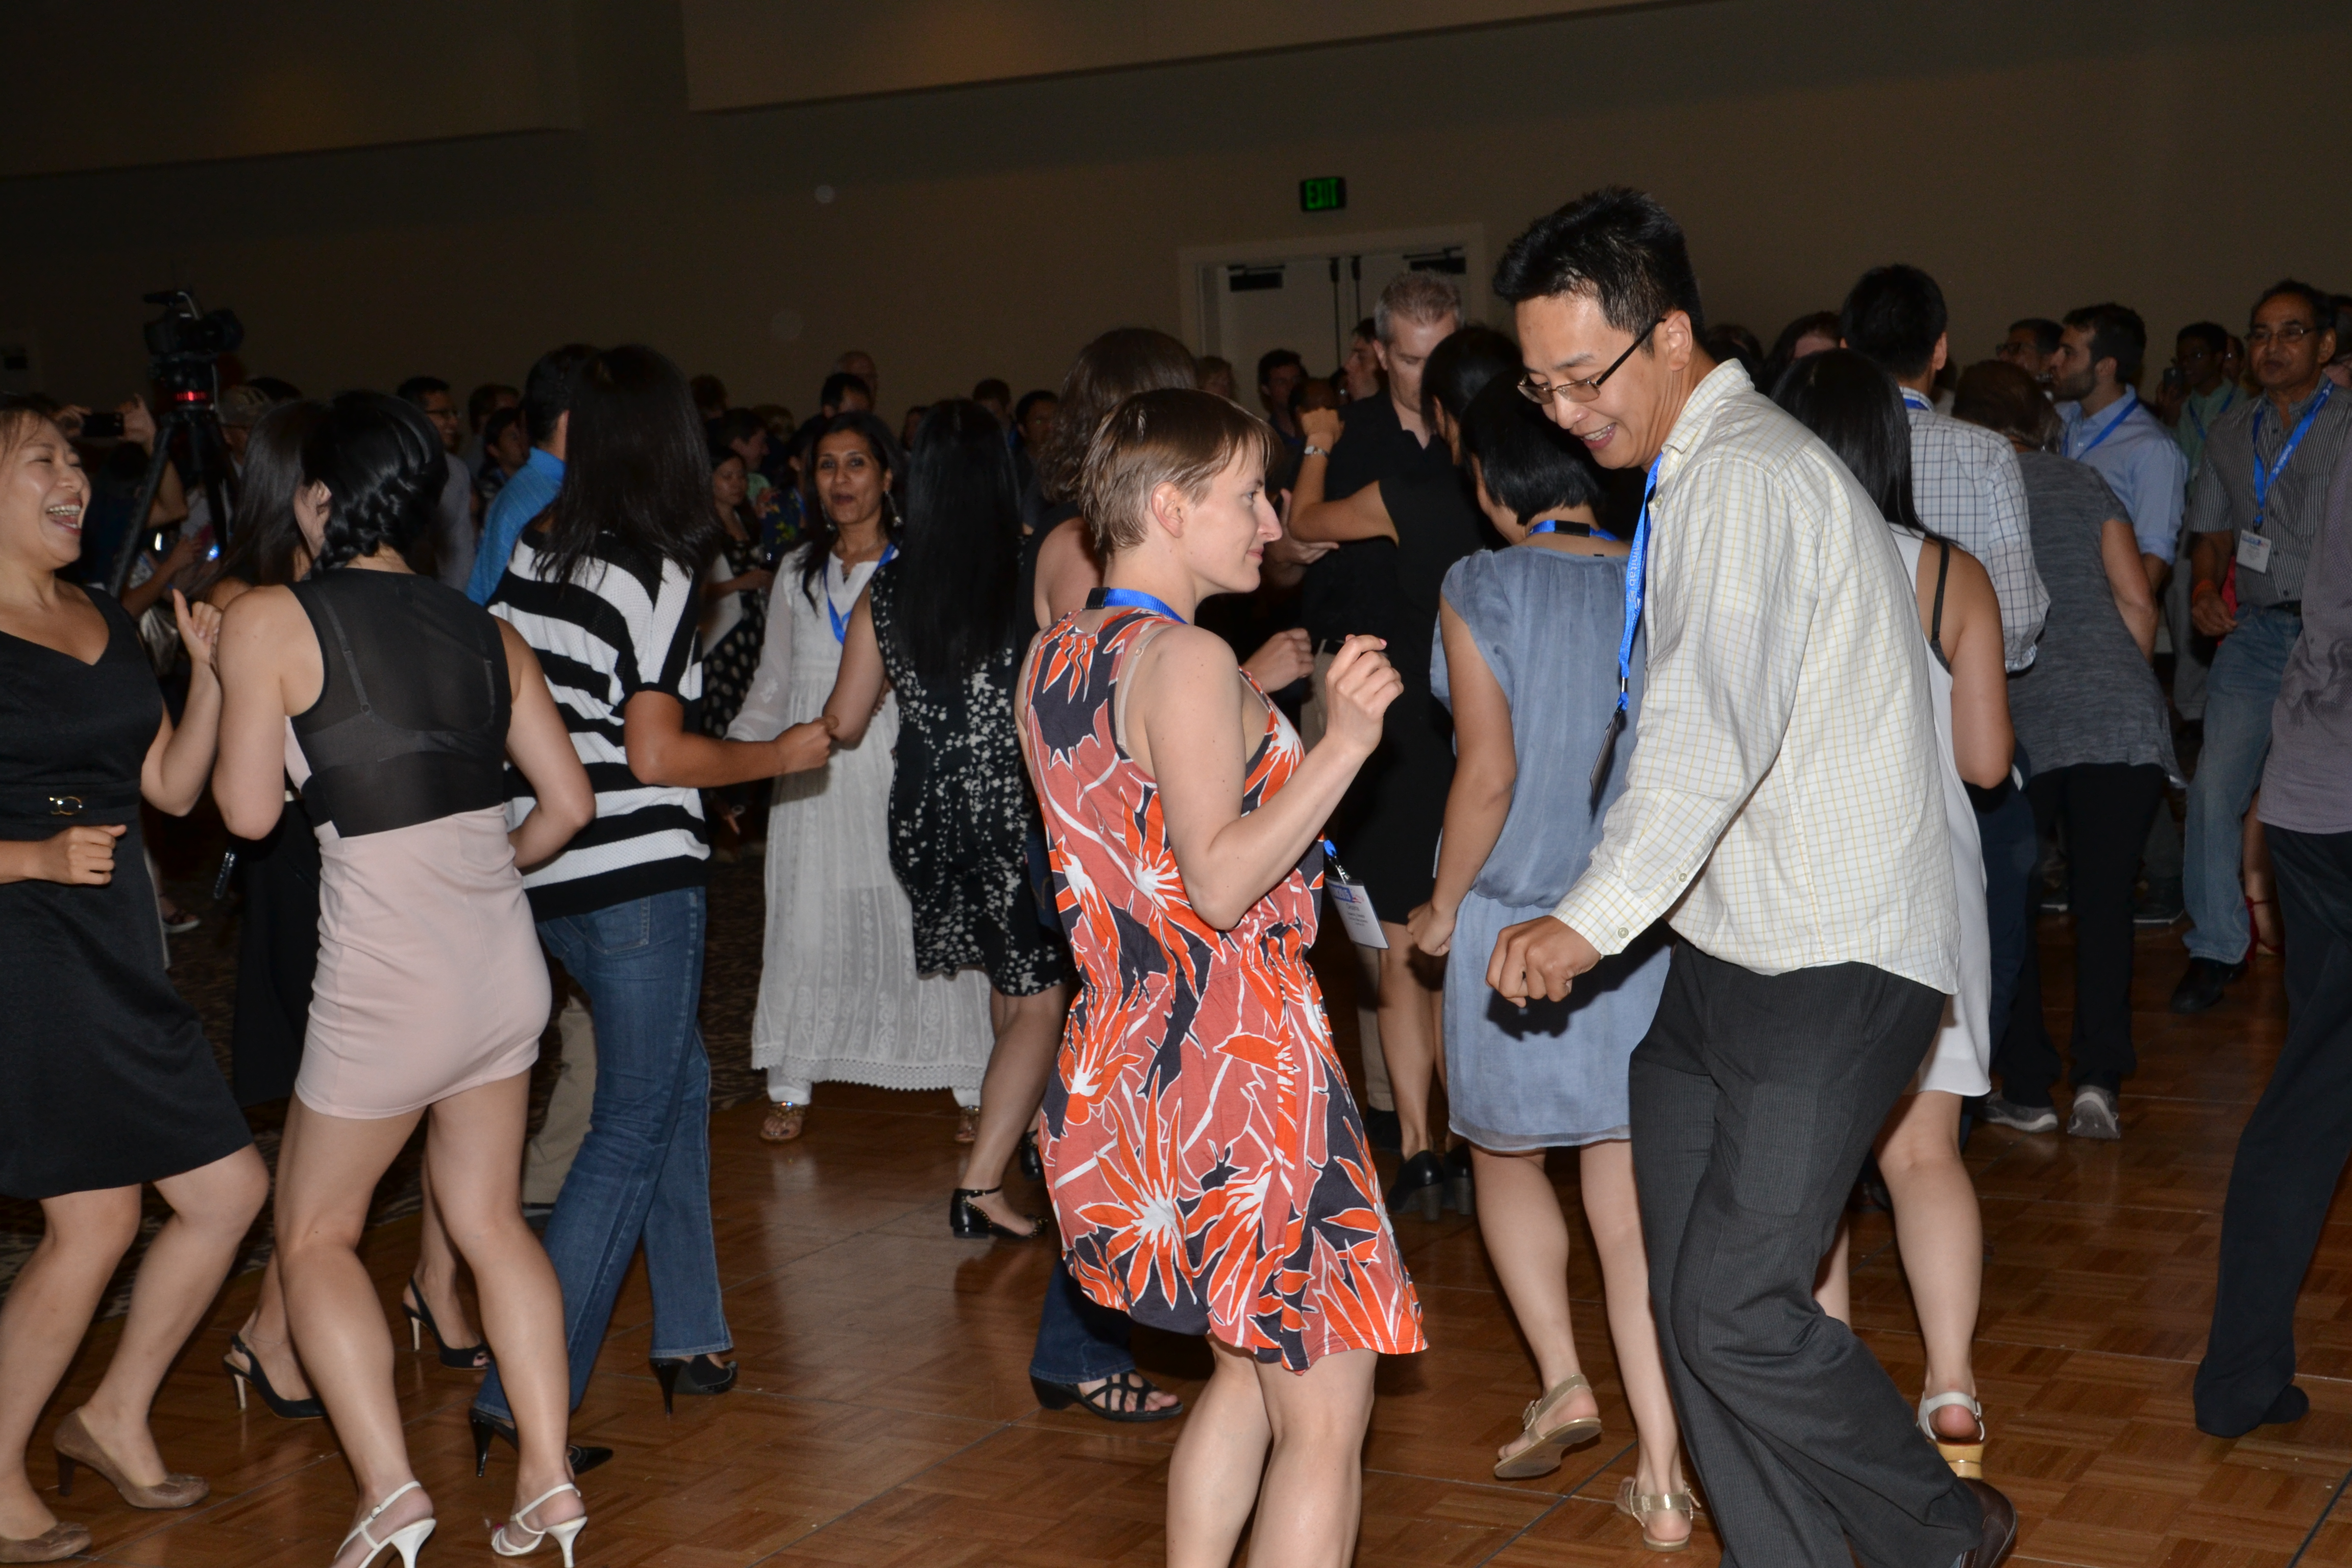 JSM 2015 attendees shimmy at the Dance Party. 